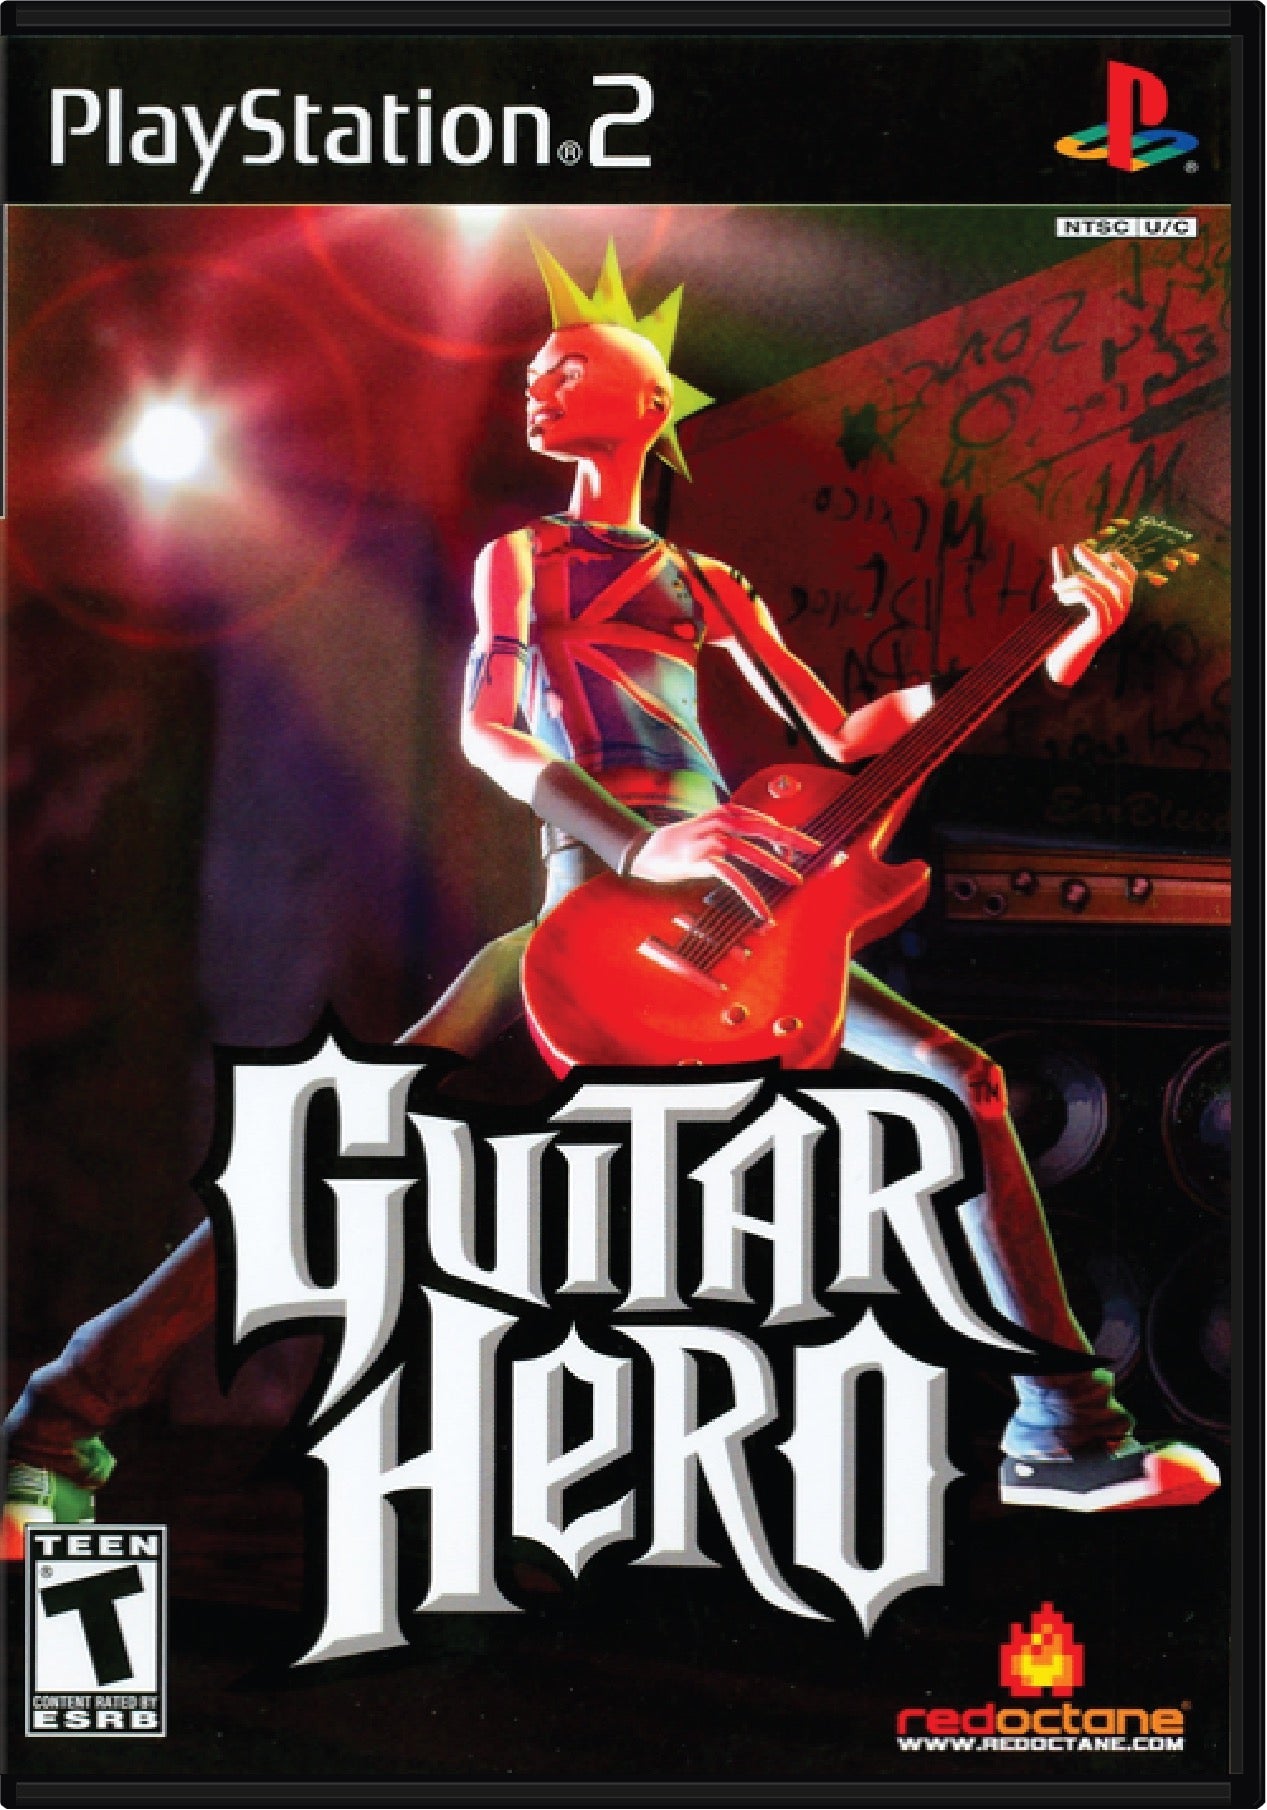 Guitar Hero Cover Art and Product Photo